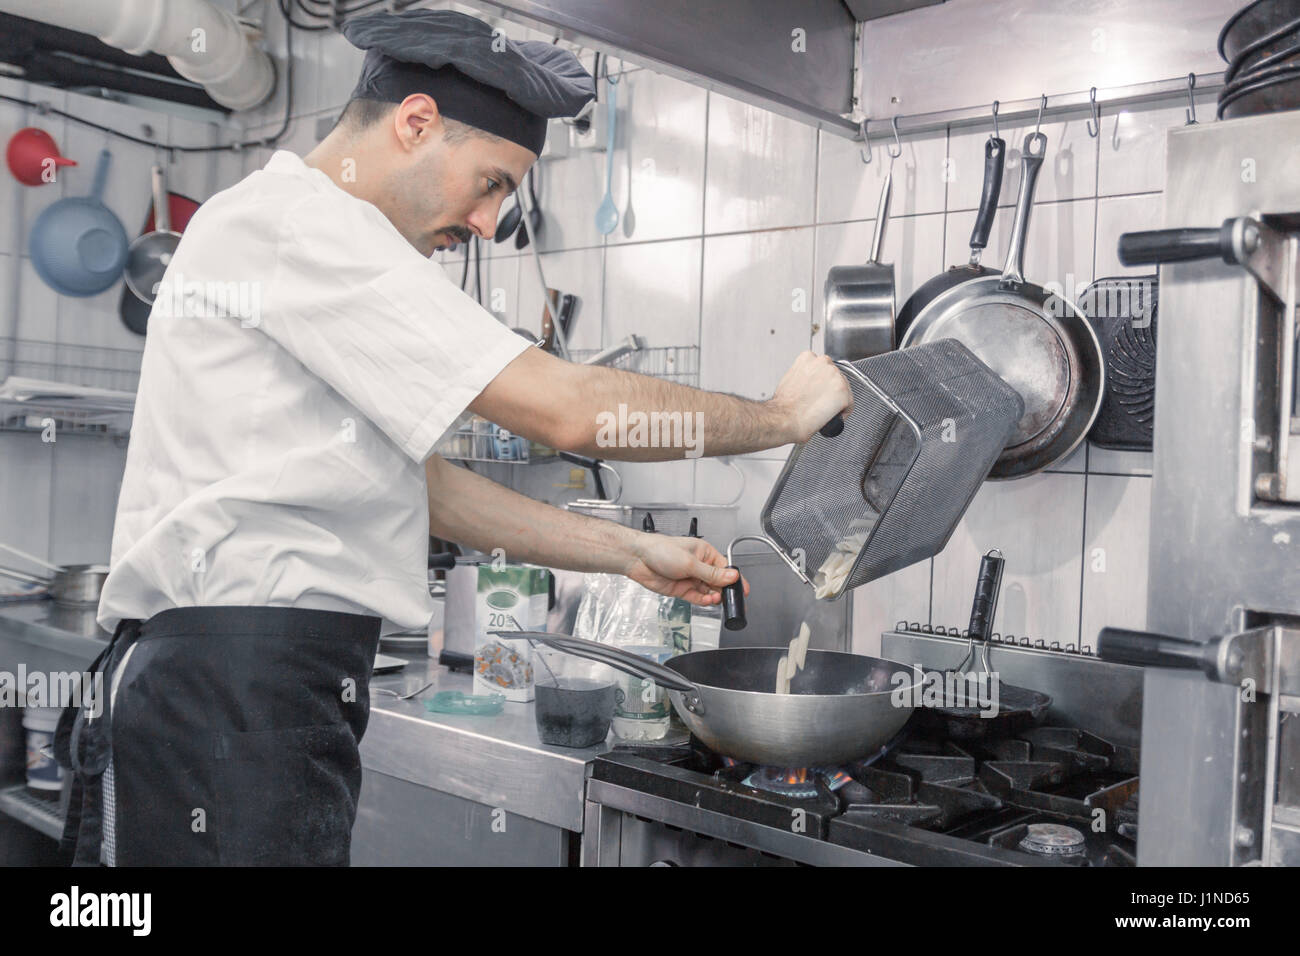 young adult man, professional chef transferring pasta pan, commercial kitchen Stock Photo